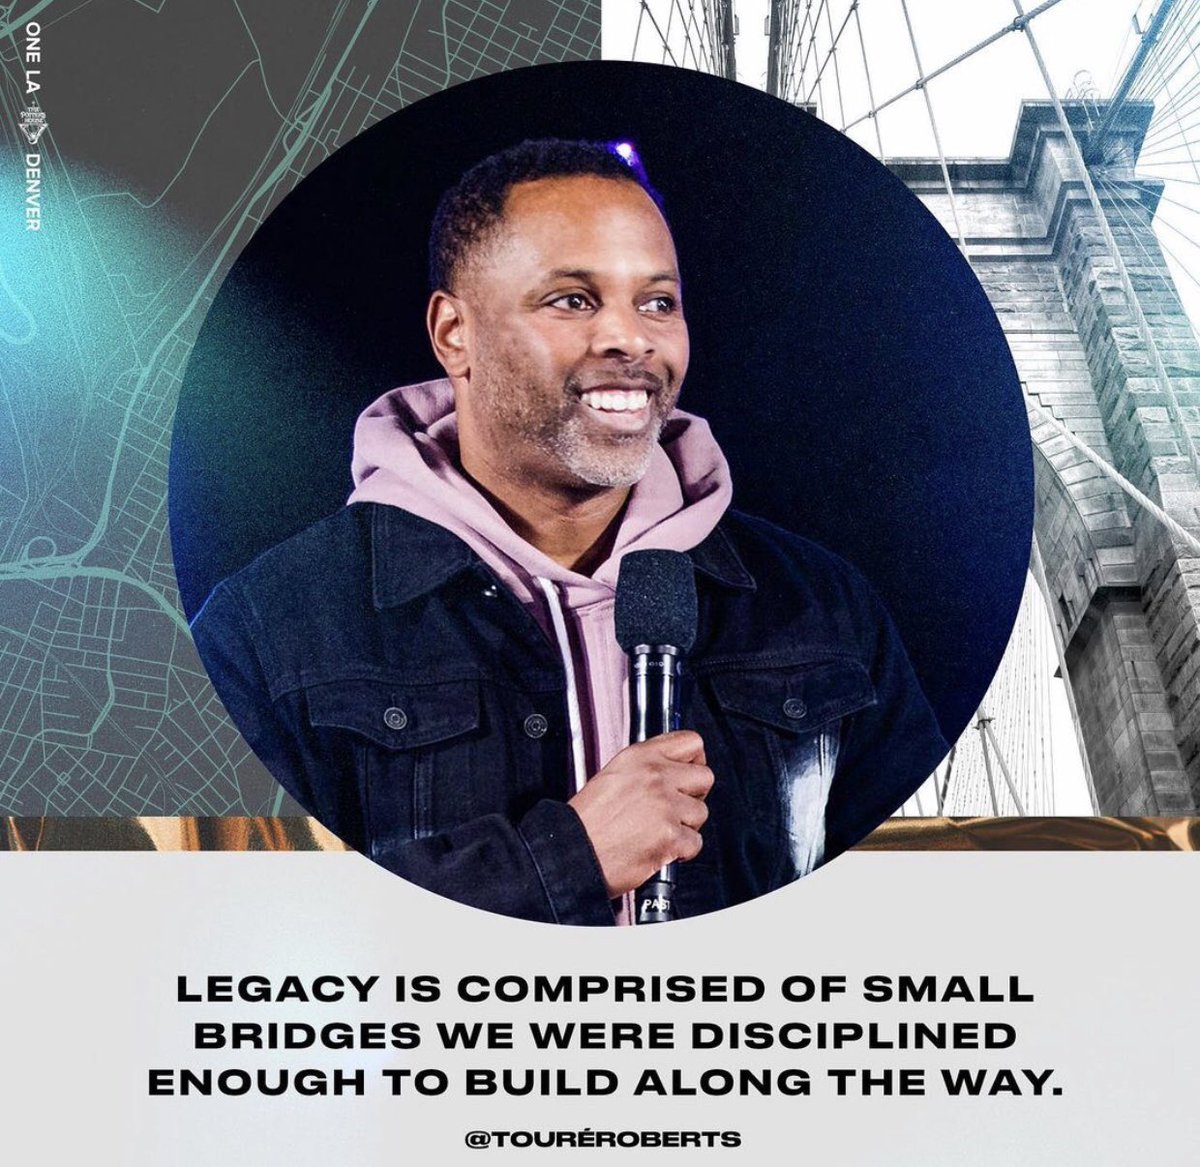 It’s never just about us; our labor and efforts are never in vain and we can trust God to connect the dots. The sooner we embrace a legacy mentality, the sooner the bridges will come. __ “Bridges & Breakthroughs” by Pastor @ToureRoberts is now available on our YouTube Channel!